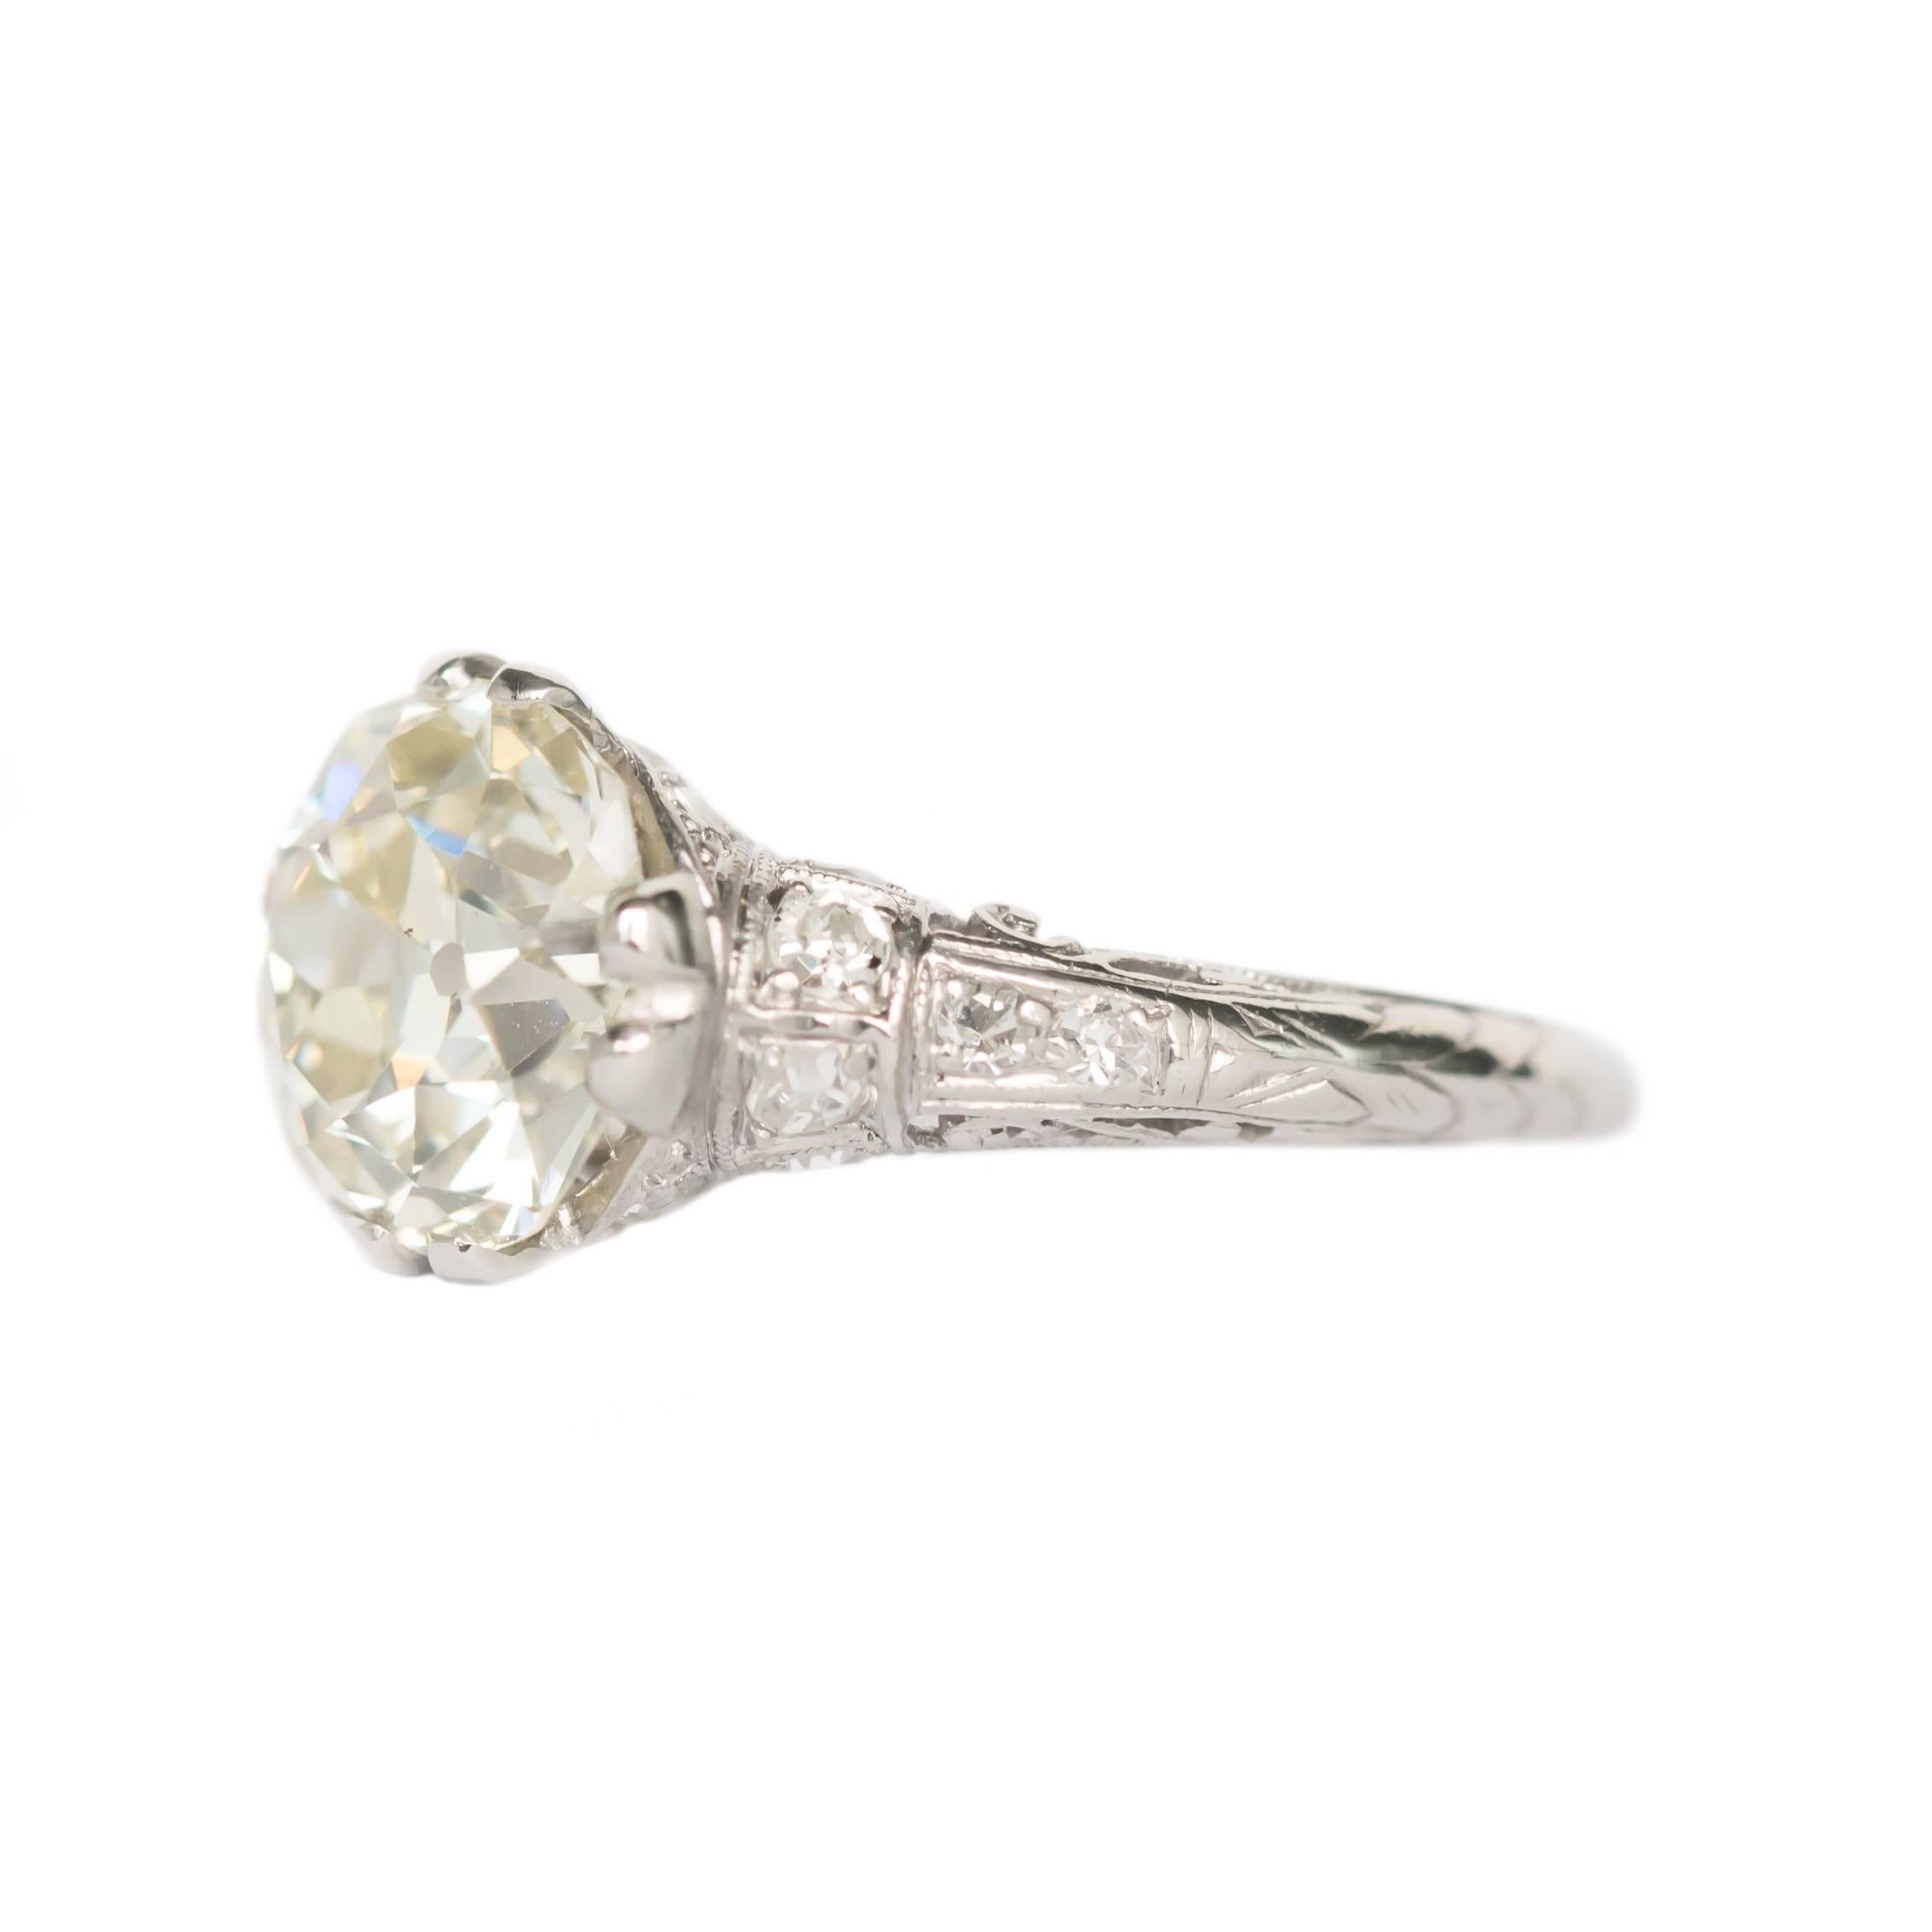 Item Details: 
Ring Size: 6.25
Metal Type: Platinum 
Weight: 4.1 grams

Center Diamond Details
GIA CERTIFIED Center Diamond - Certificate # 6193422254
Shape: Old Mine Brilliant 
Carat Weight: 3.09 carat
Color: O to P Range 
Clarity: VS2

Side Stone